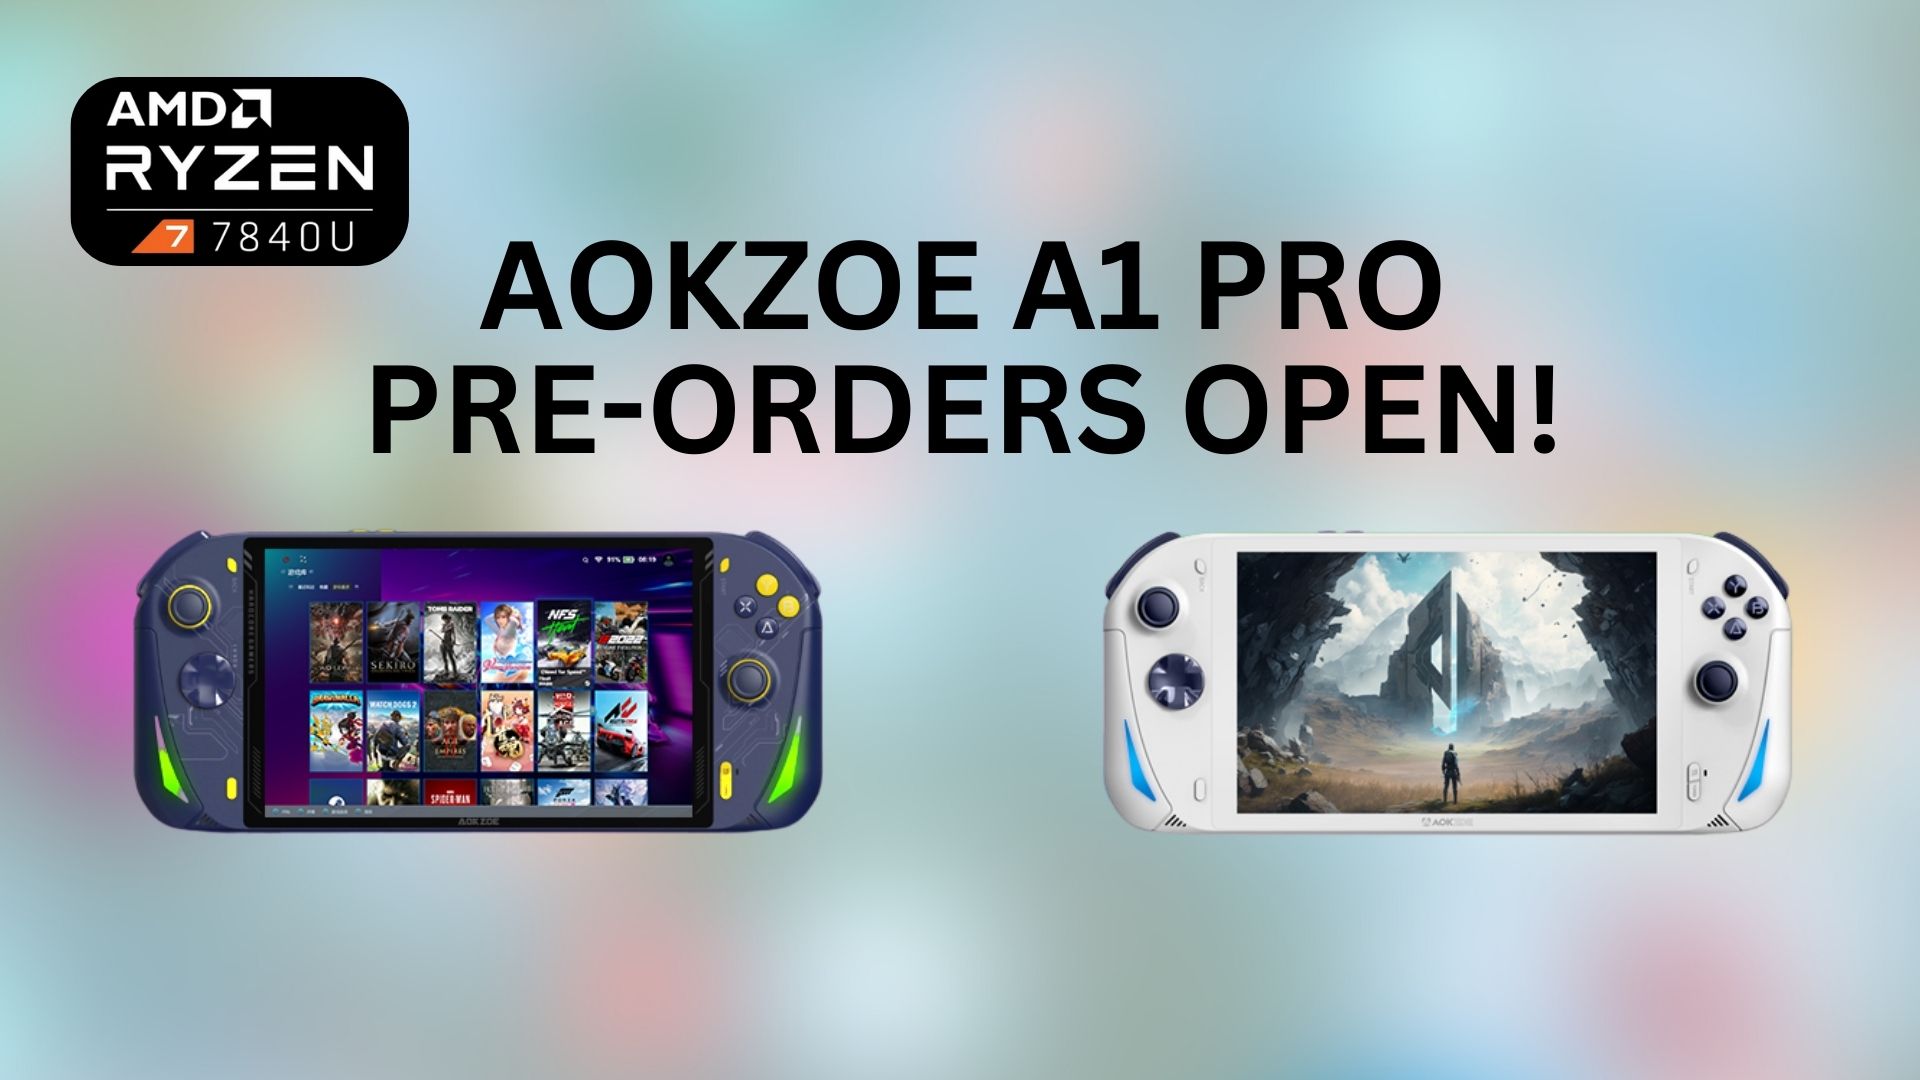 AOKZOE A1 Pro pre-orders available! – Get front of the queue for this Windows handheld gaming PC